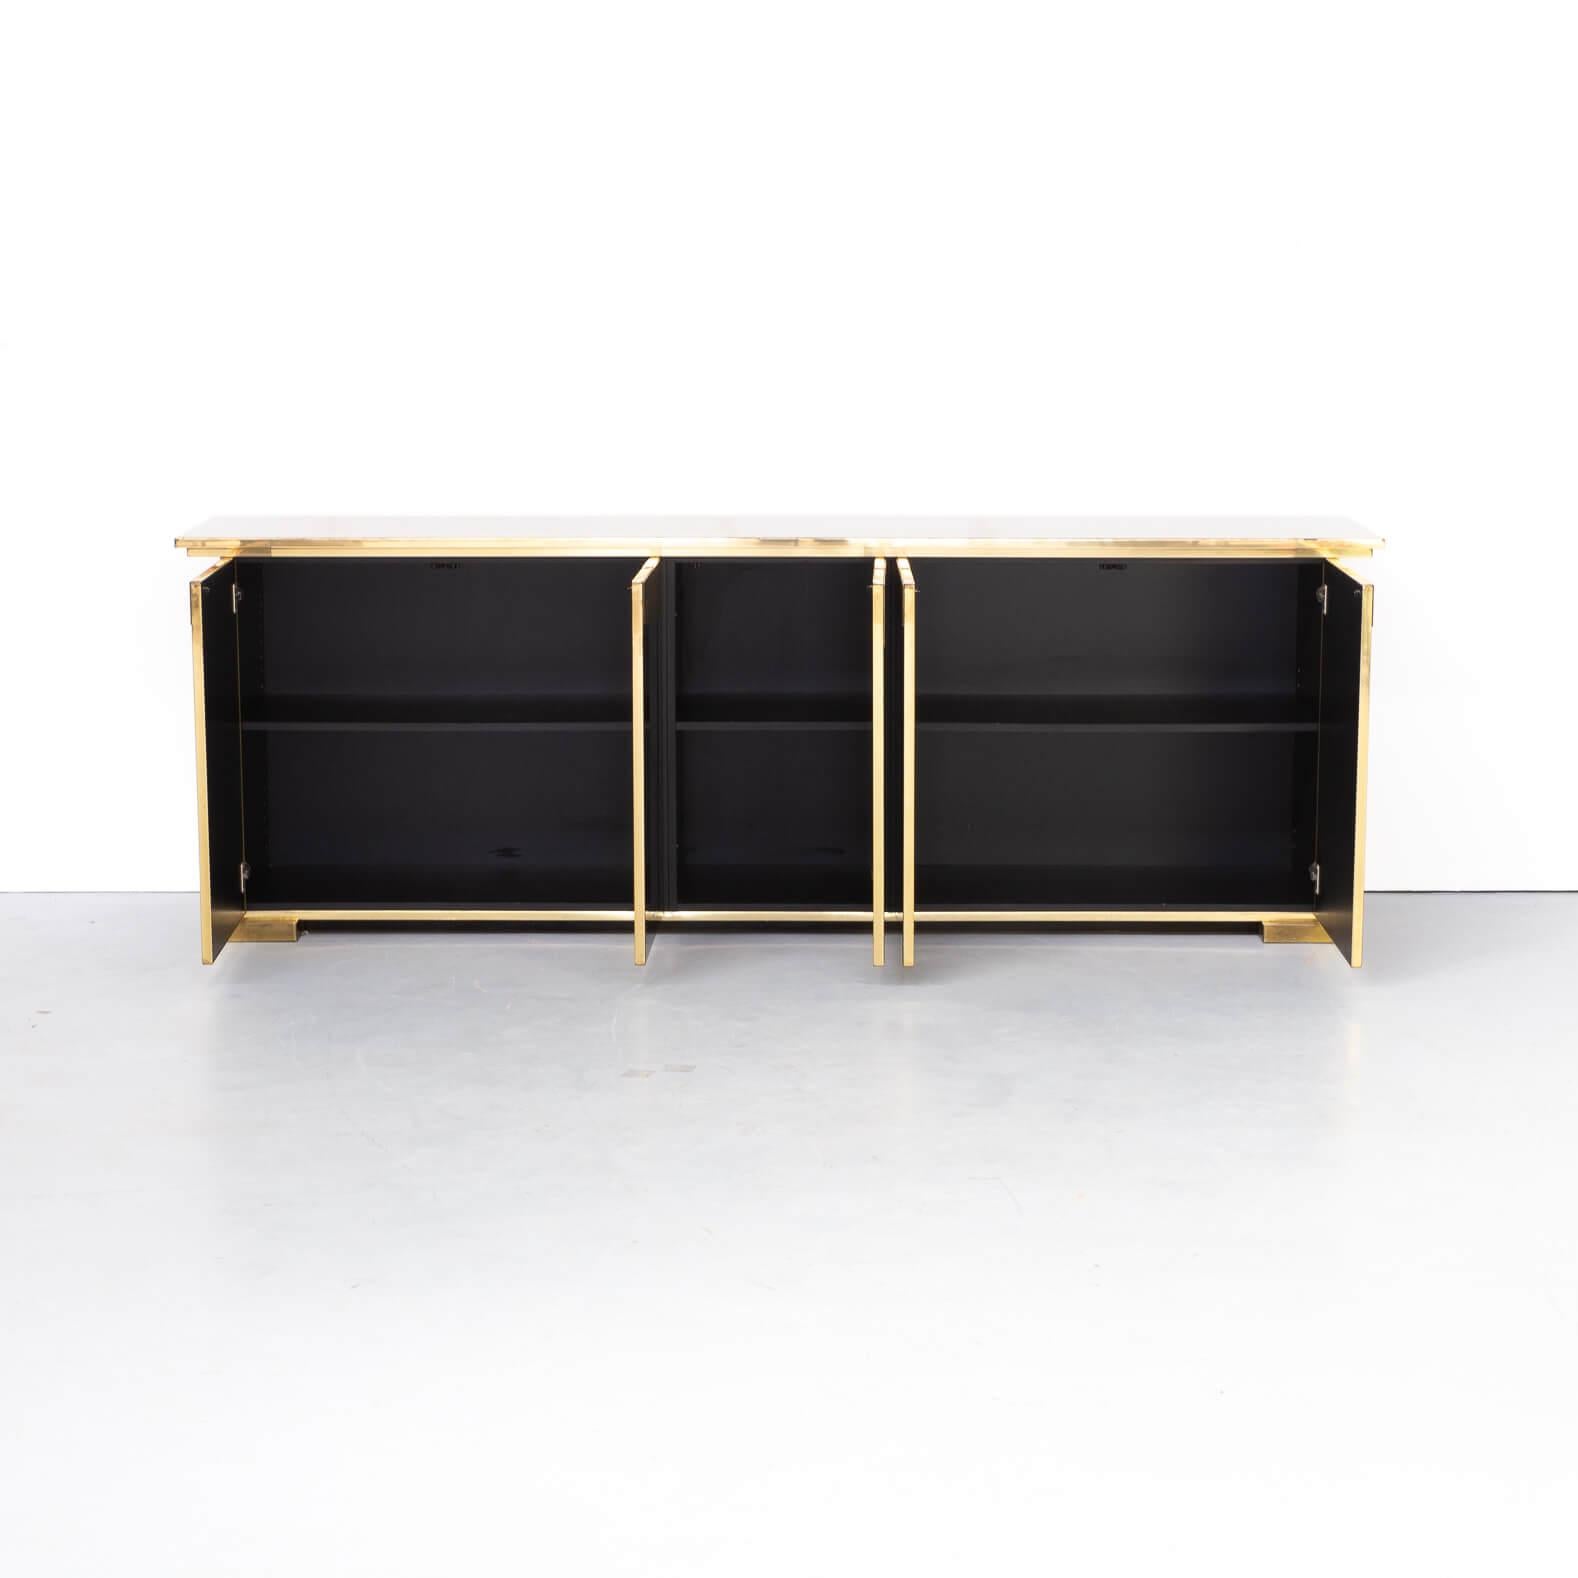 Hollywood Regency is an interplay of mid-century design furniture of dark wood and clean lines, combined with the glamor, patterns and materials of Art Deco. Brass, black, copper are commonly used materials in this style. The Hollywood Regency